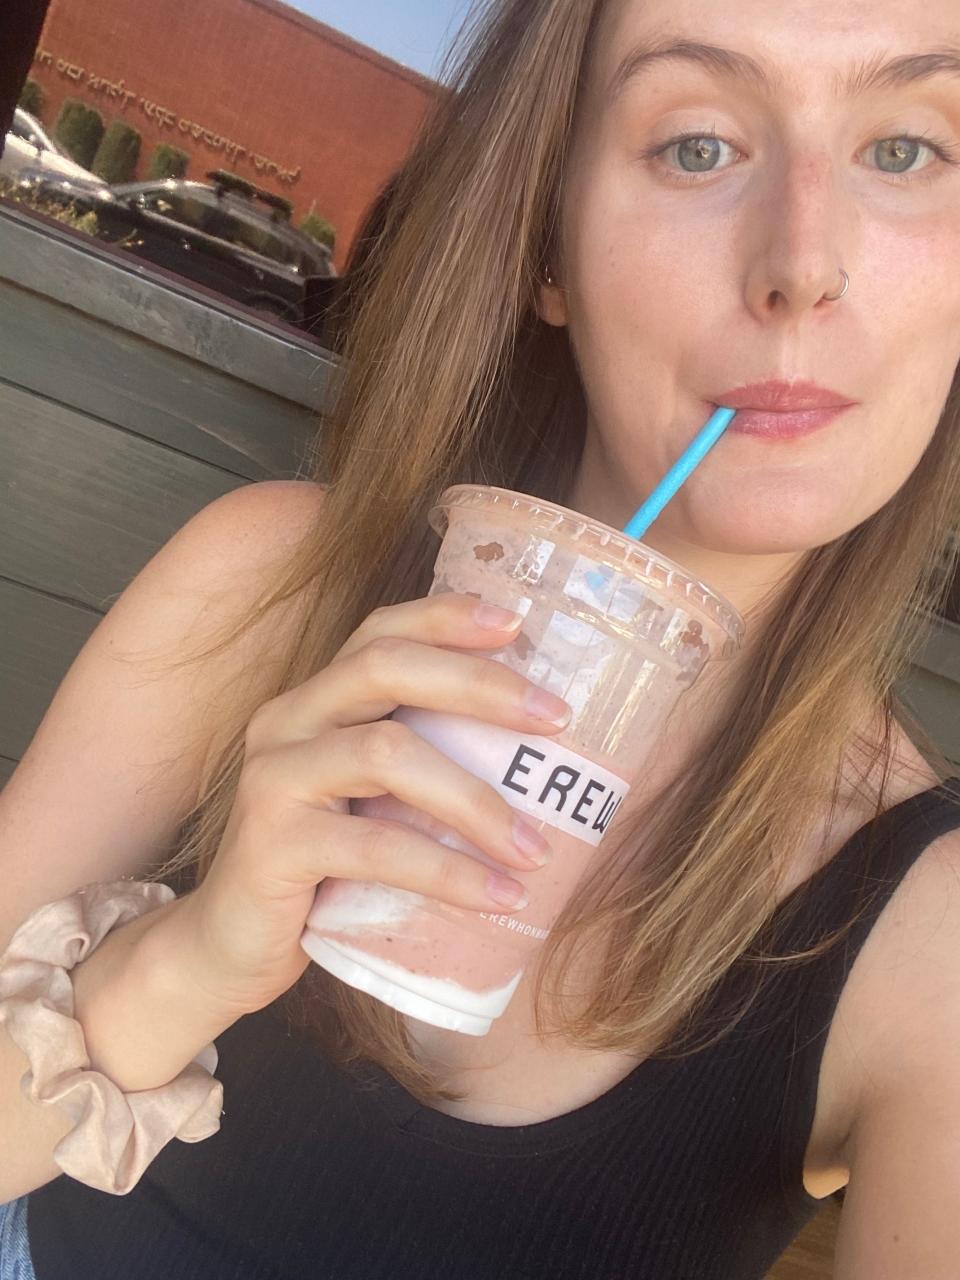 Shelby drinking the Hailey Bieber Smoothie